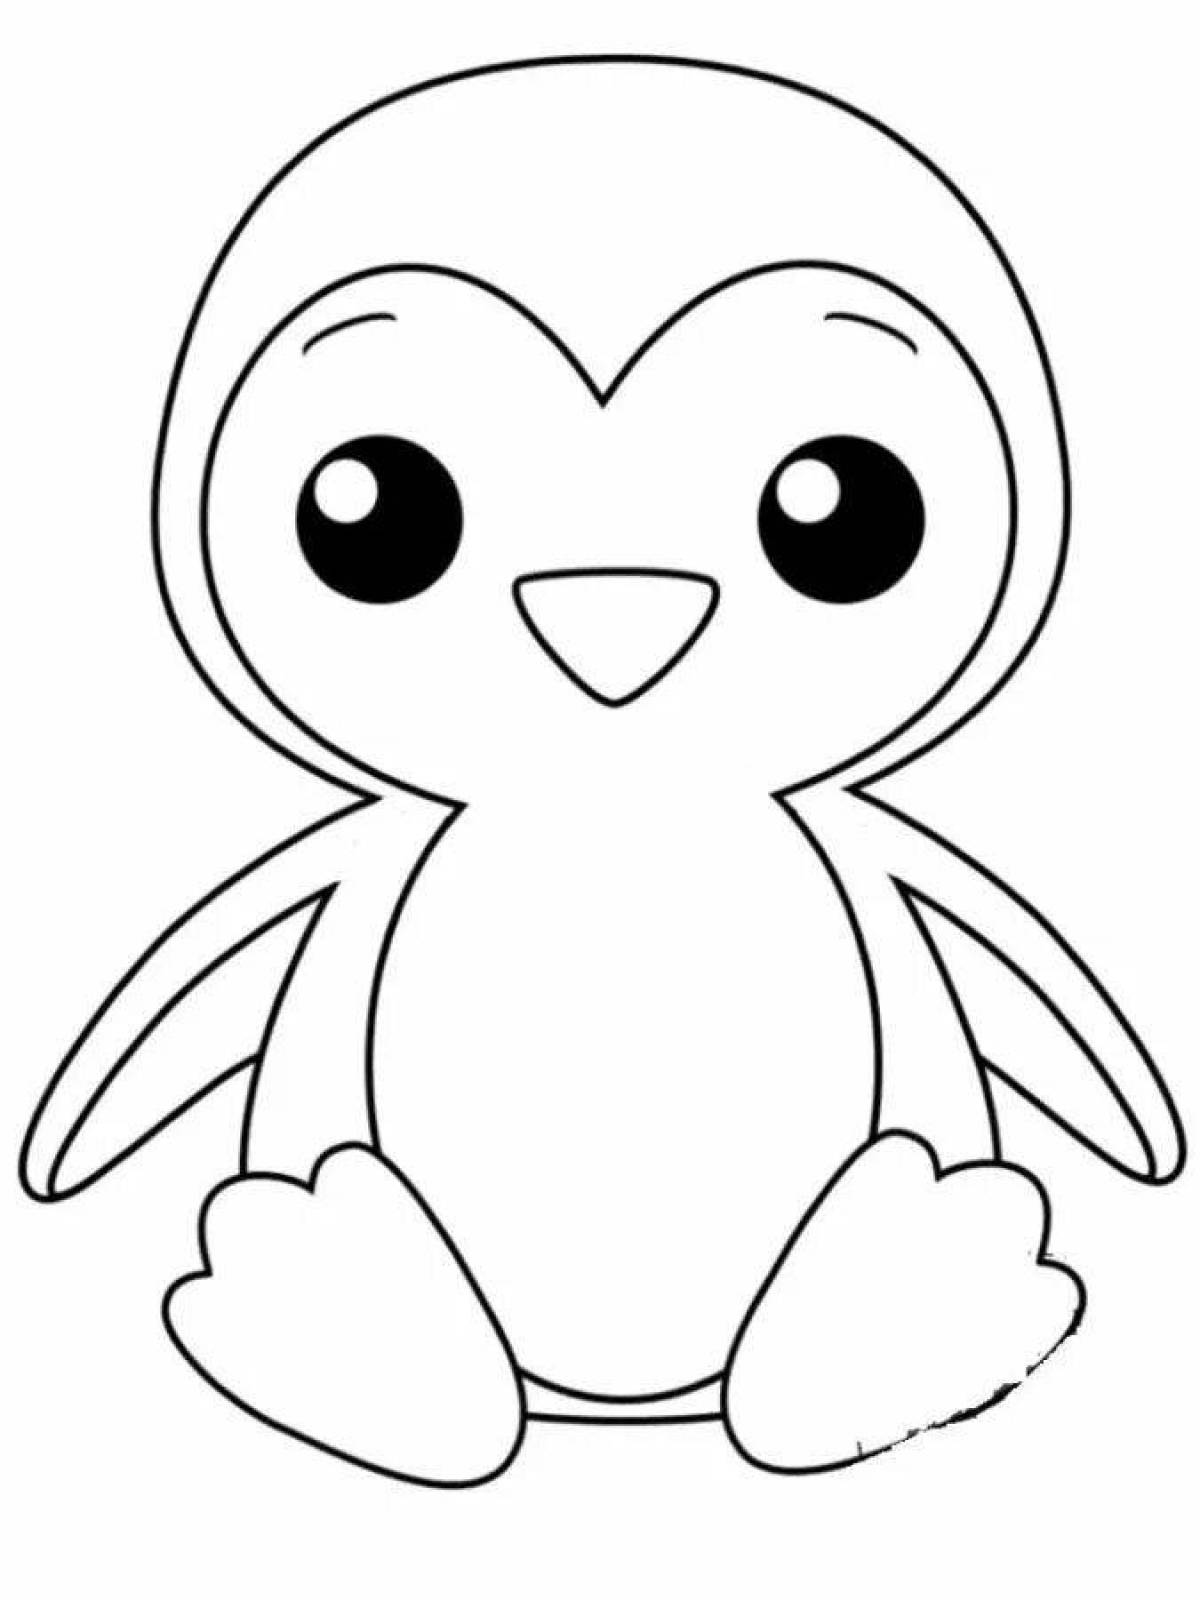 Coloring page cute and funny penguin